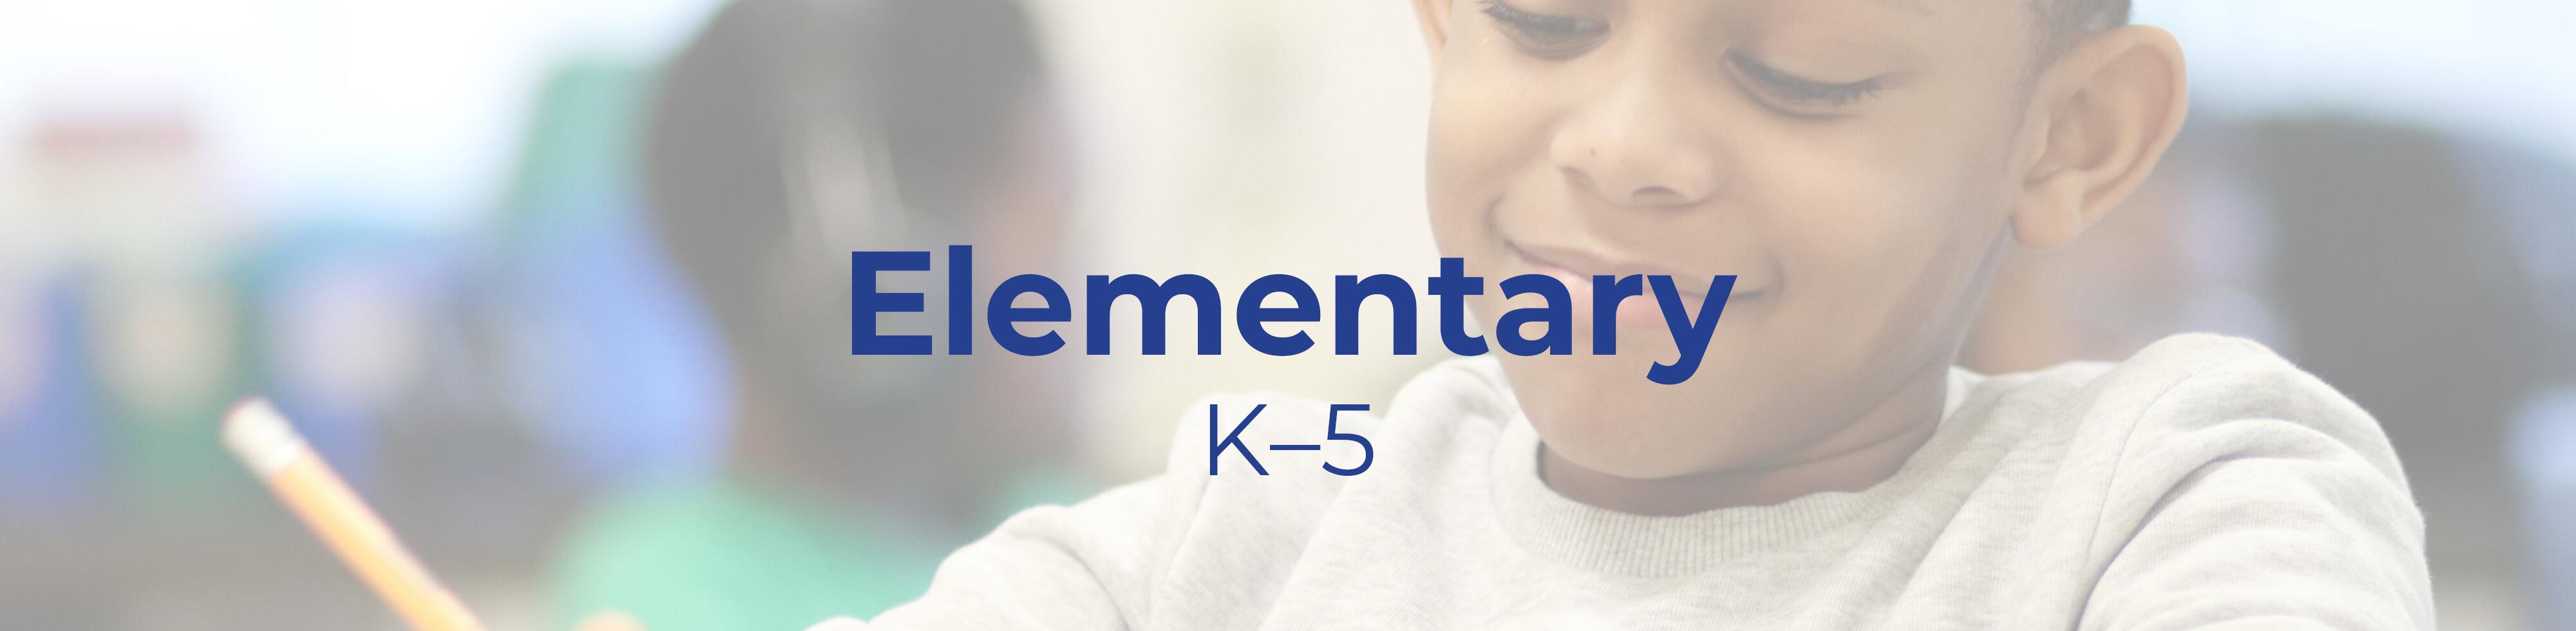 Text that reads "Elementary K-5" overlaid on a picture of a student working